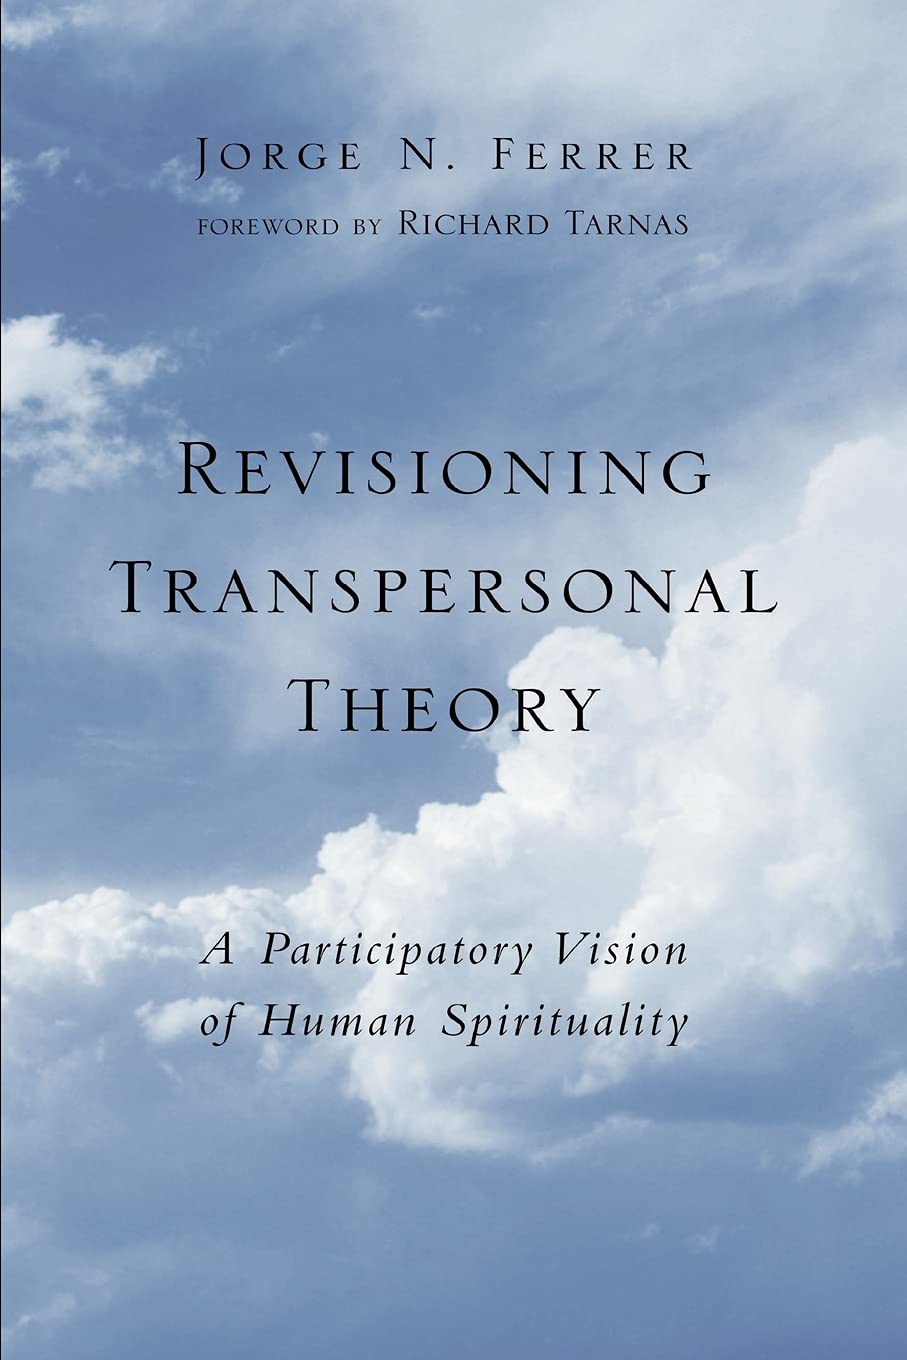 Revisioning Transpersonal Theory : A Participatory Vision of Human Spirituality (Suny Series in Transpersonal and Humanistic Psychology)